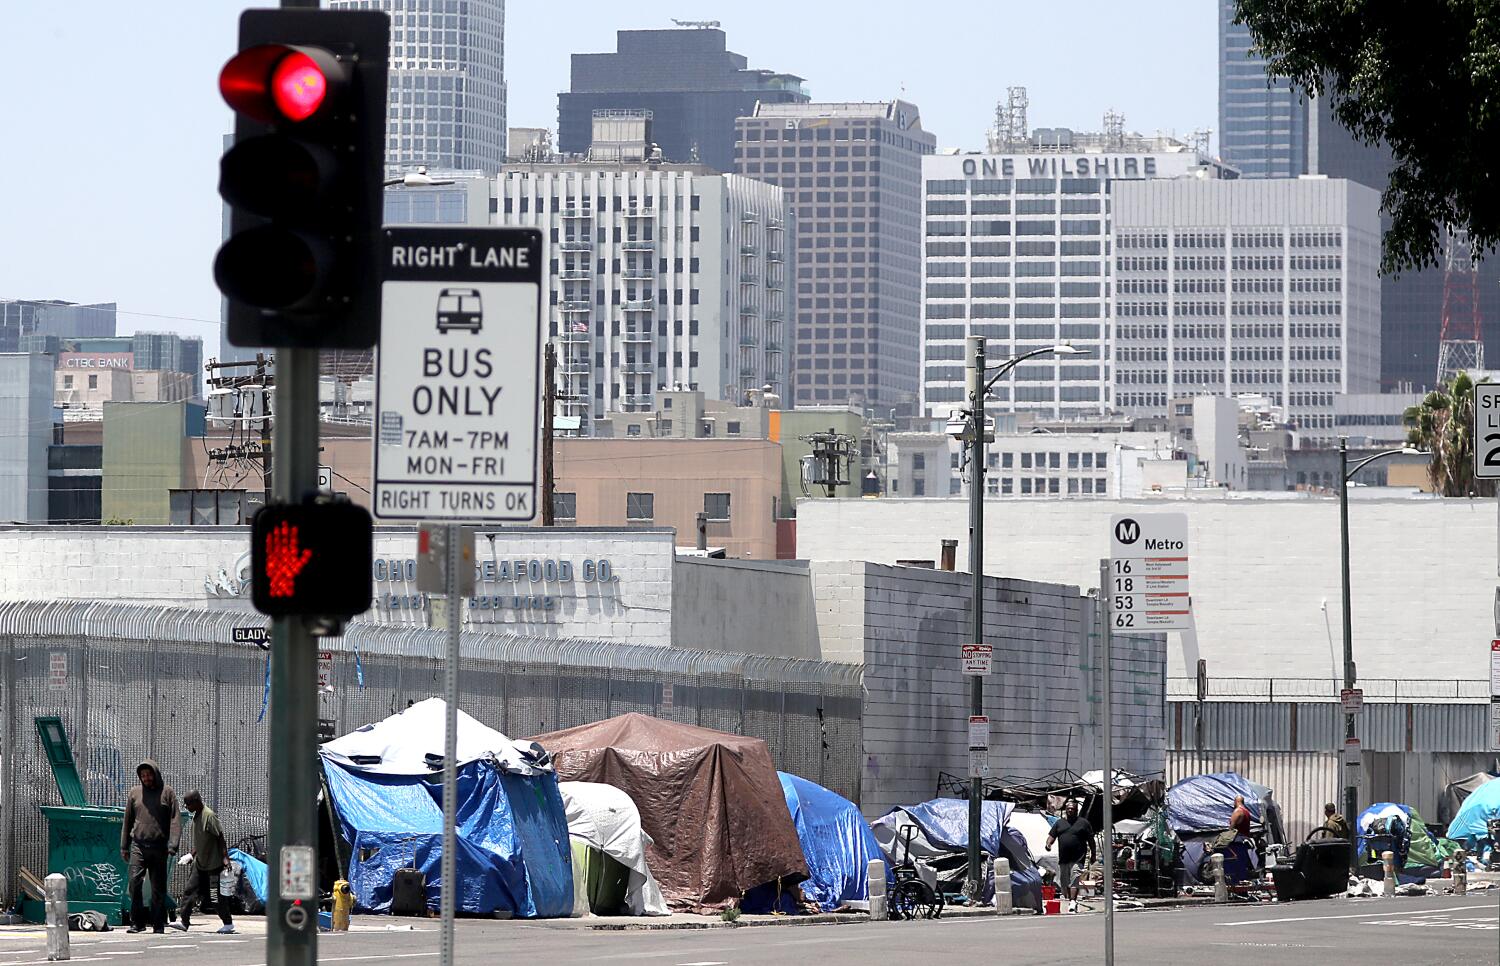 ?url=https%3A%2F%2Fcalifornia times brightspot.s3.amazonaws.com%2Fb0%2F6b%2F633c6aaa4fde863615c5ed85b437%2F1316464 me homelessness population count jumps010 ls